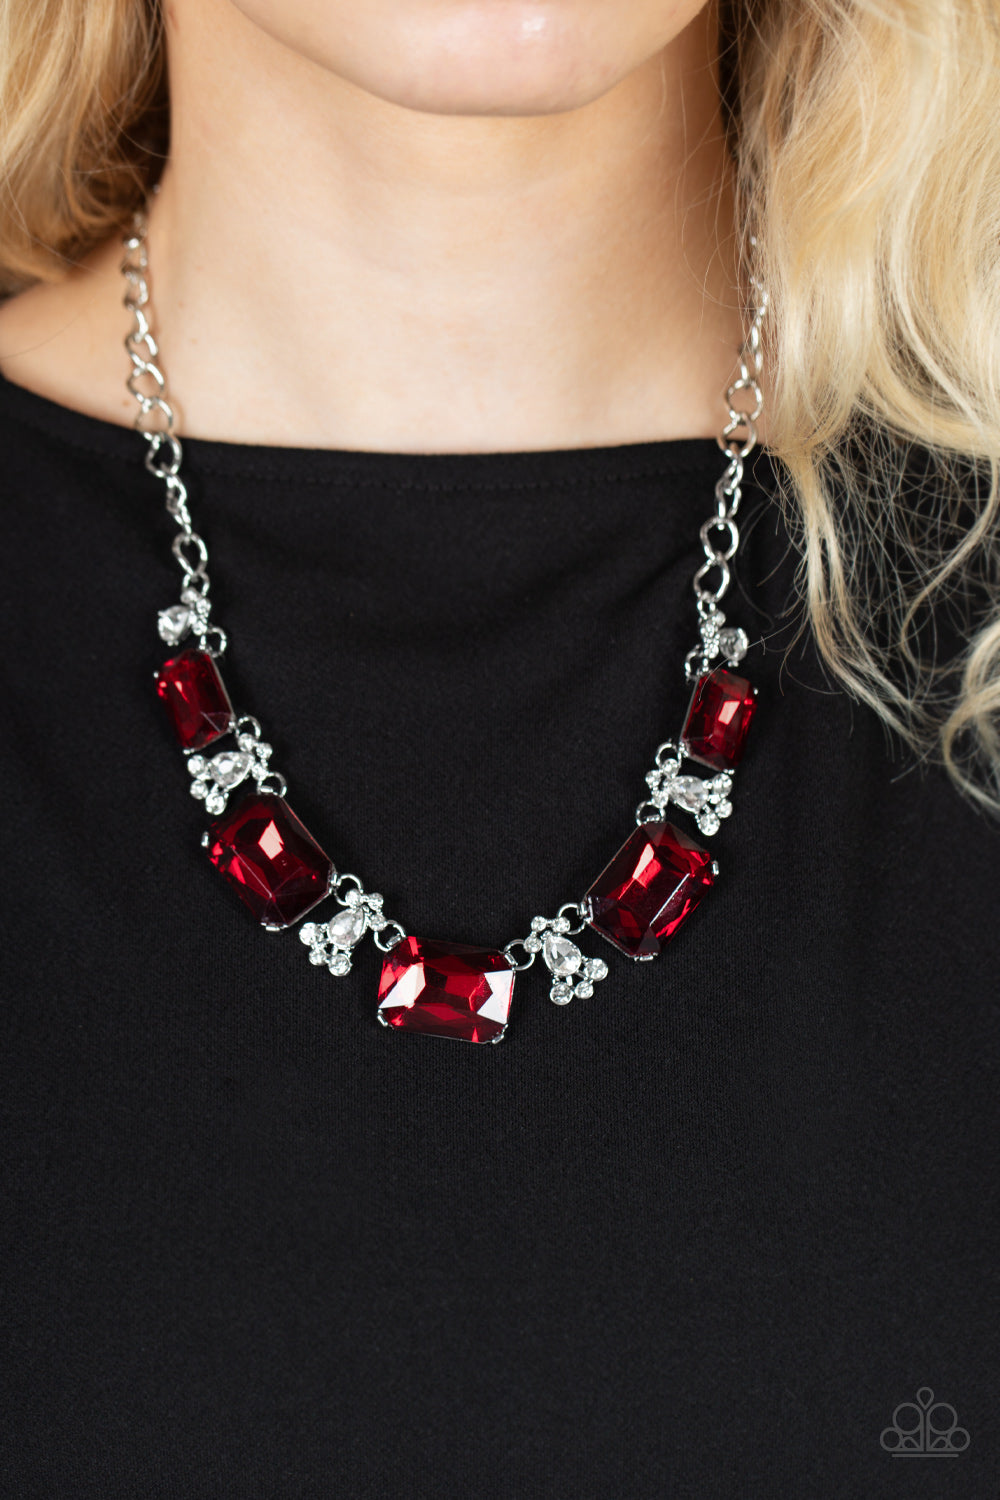 Flawlessly Famous Necklace (Red, Multi, Pink)